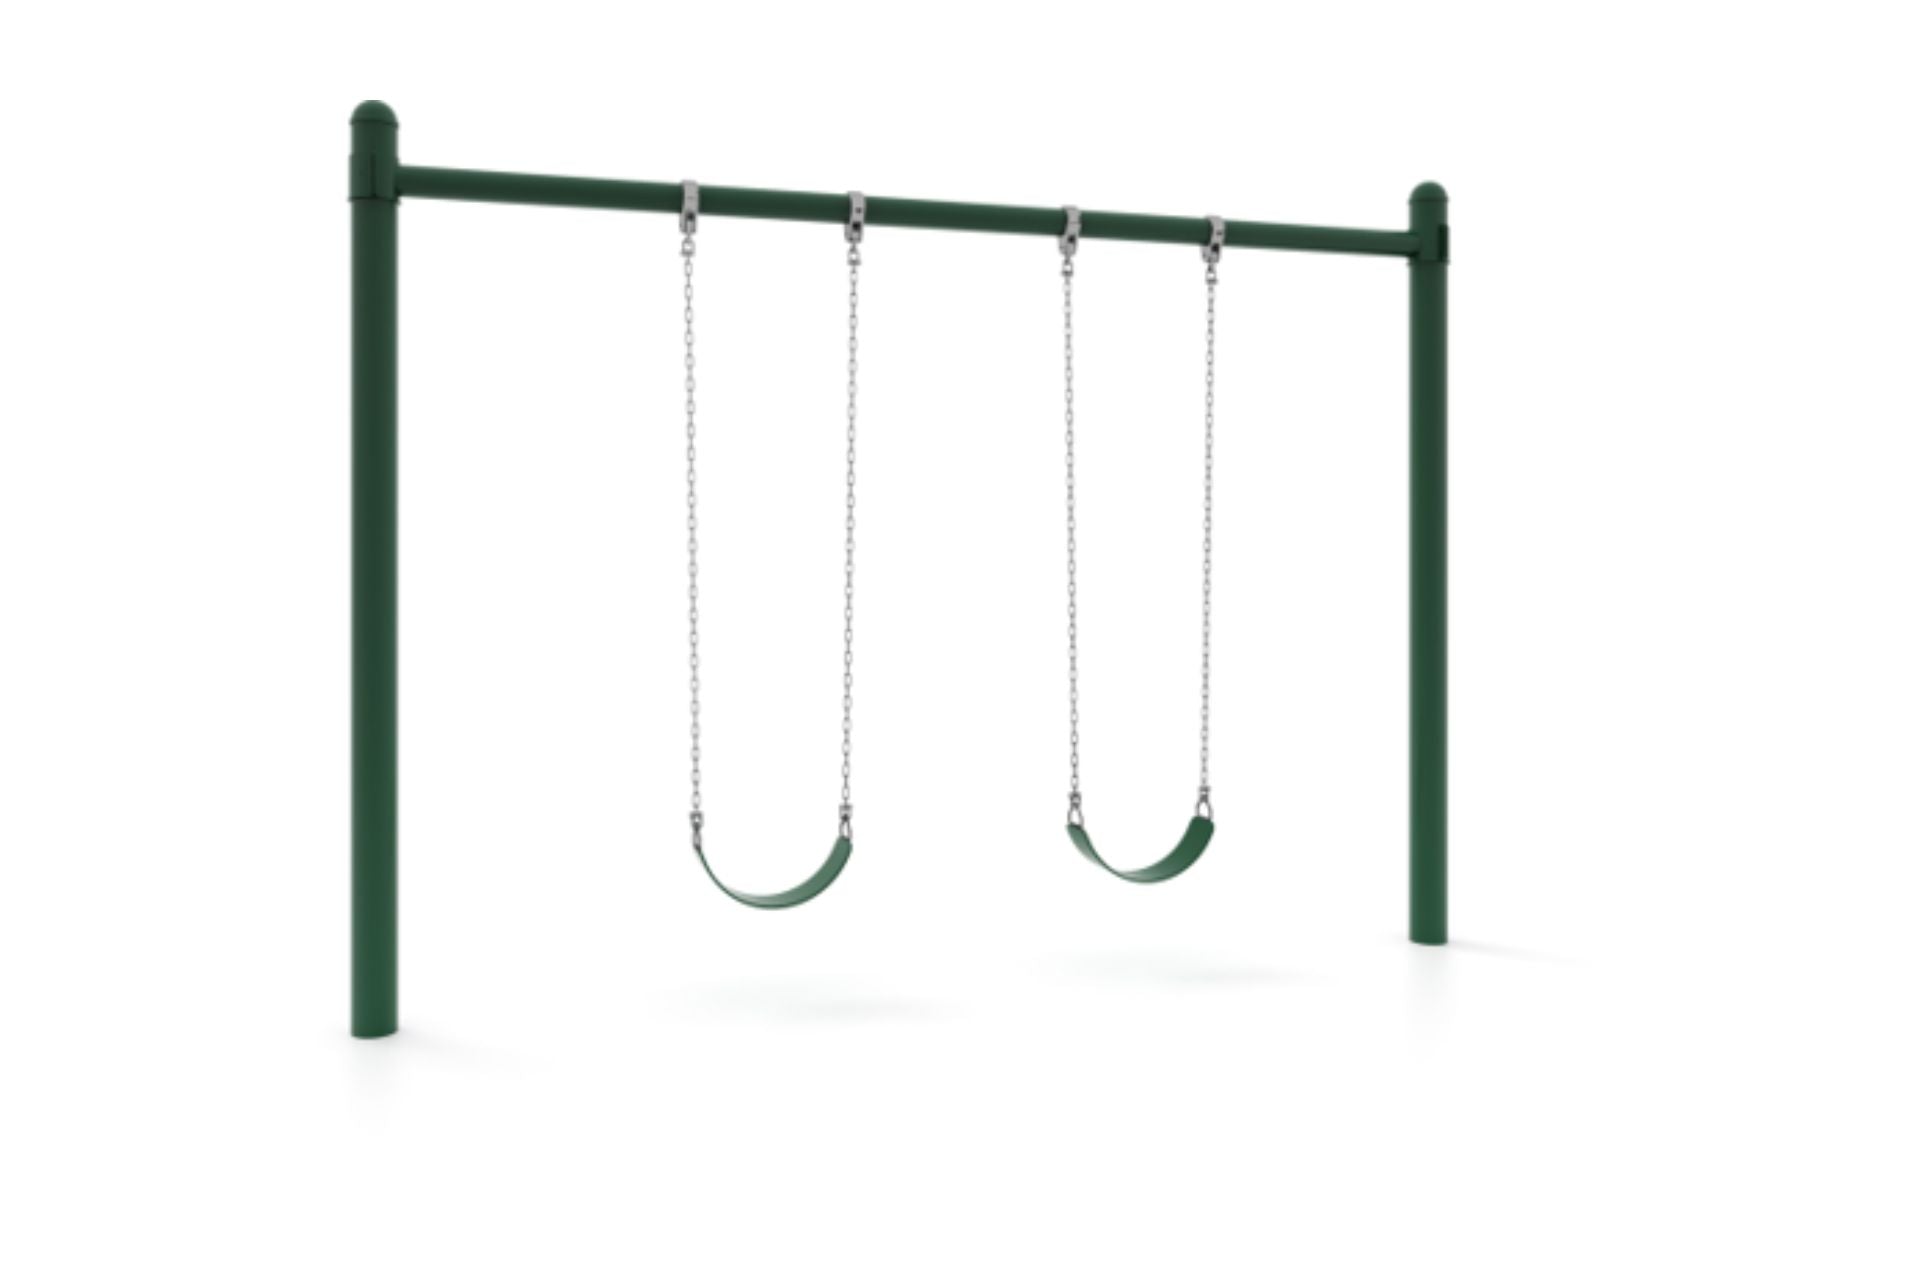 Perspective View of Single Post Swing Set in Green with 2 Swings